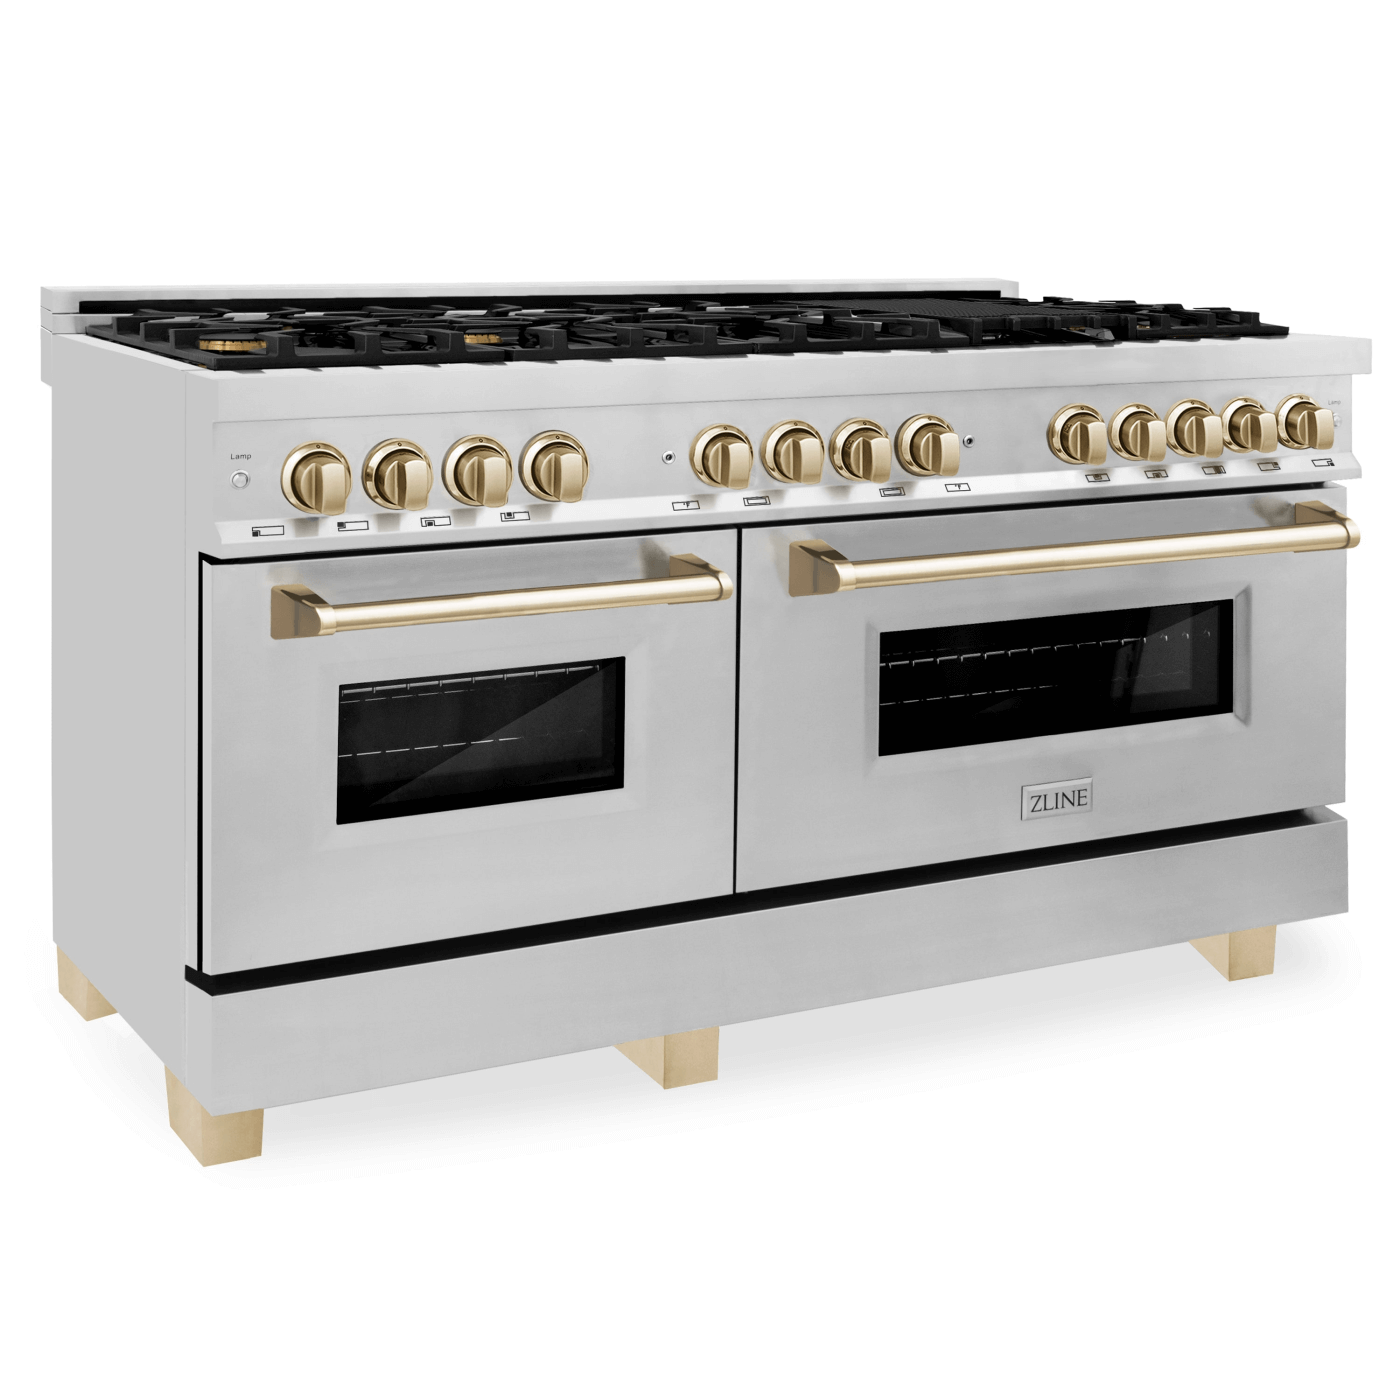 ZLINE Autograph Edition 60 in. 7.4 cu. ft. Dual Fuel Range with Gas Stove and Electric Oven in Stainless Steel with Accents (RAZ-60) - white background